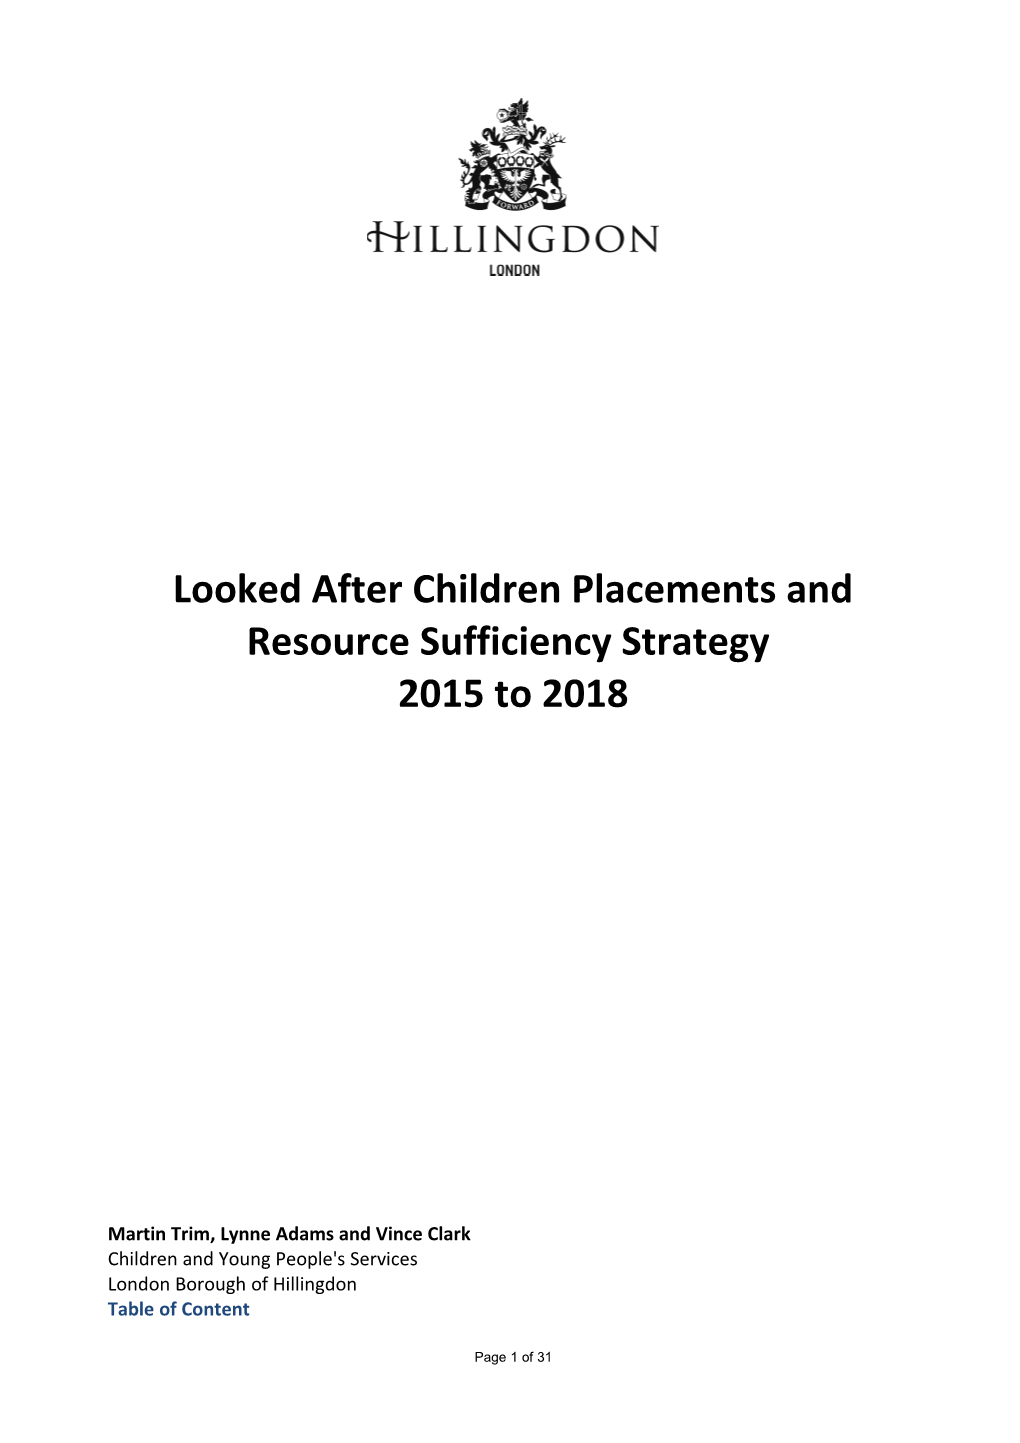 Looked After Children Placements and Resource Sufficiency Strategy